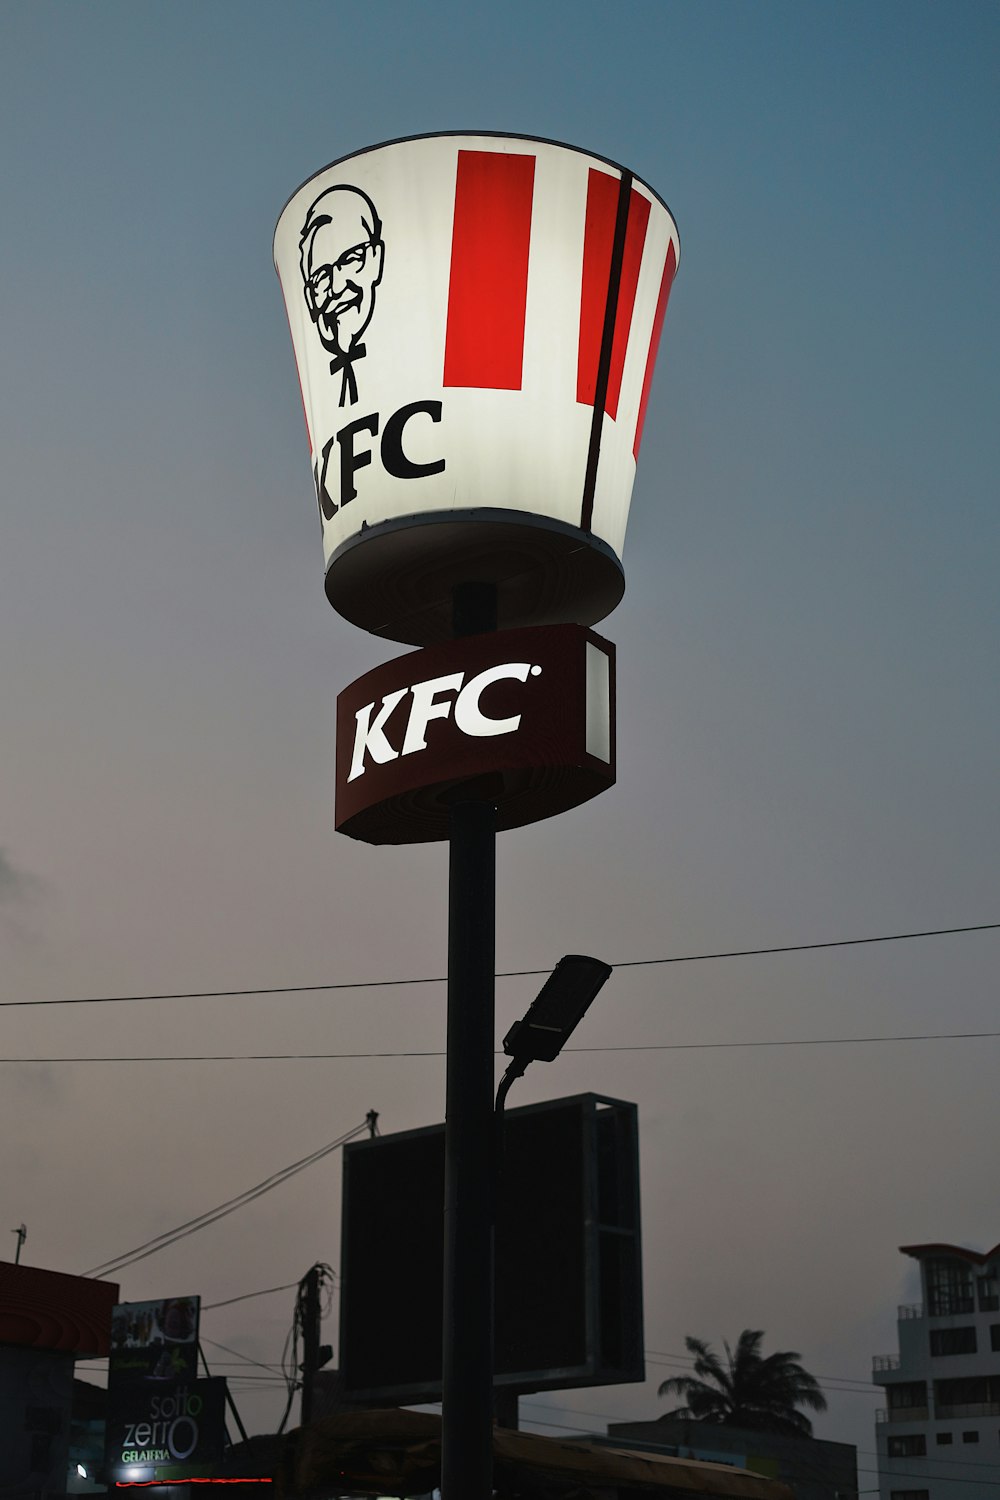 a kfc sign with a man's face on it